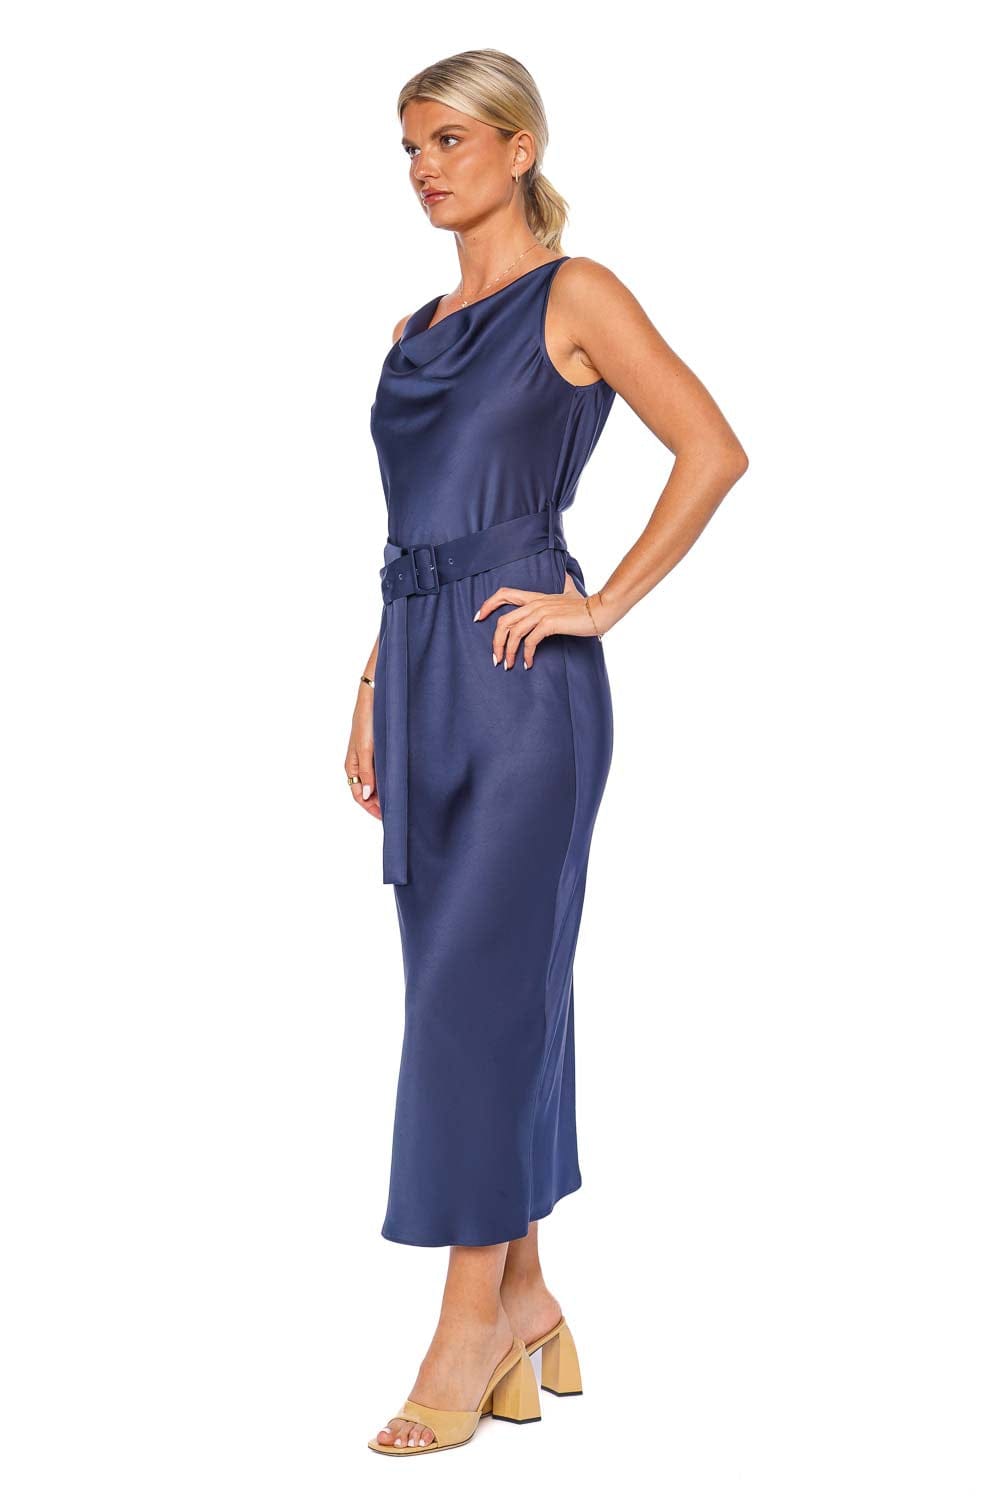 LAPOINTE Ink Textured Satin Belted Midi Dress